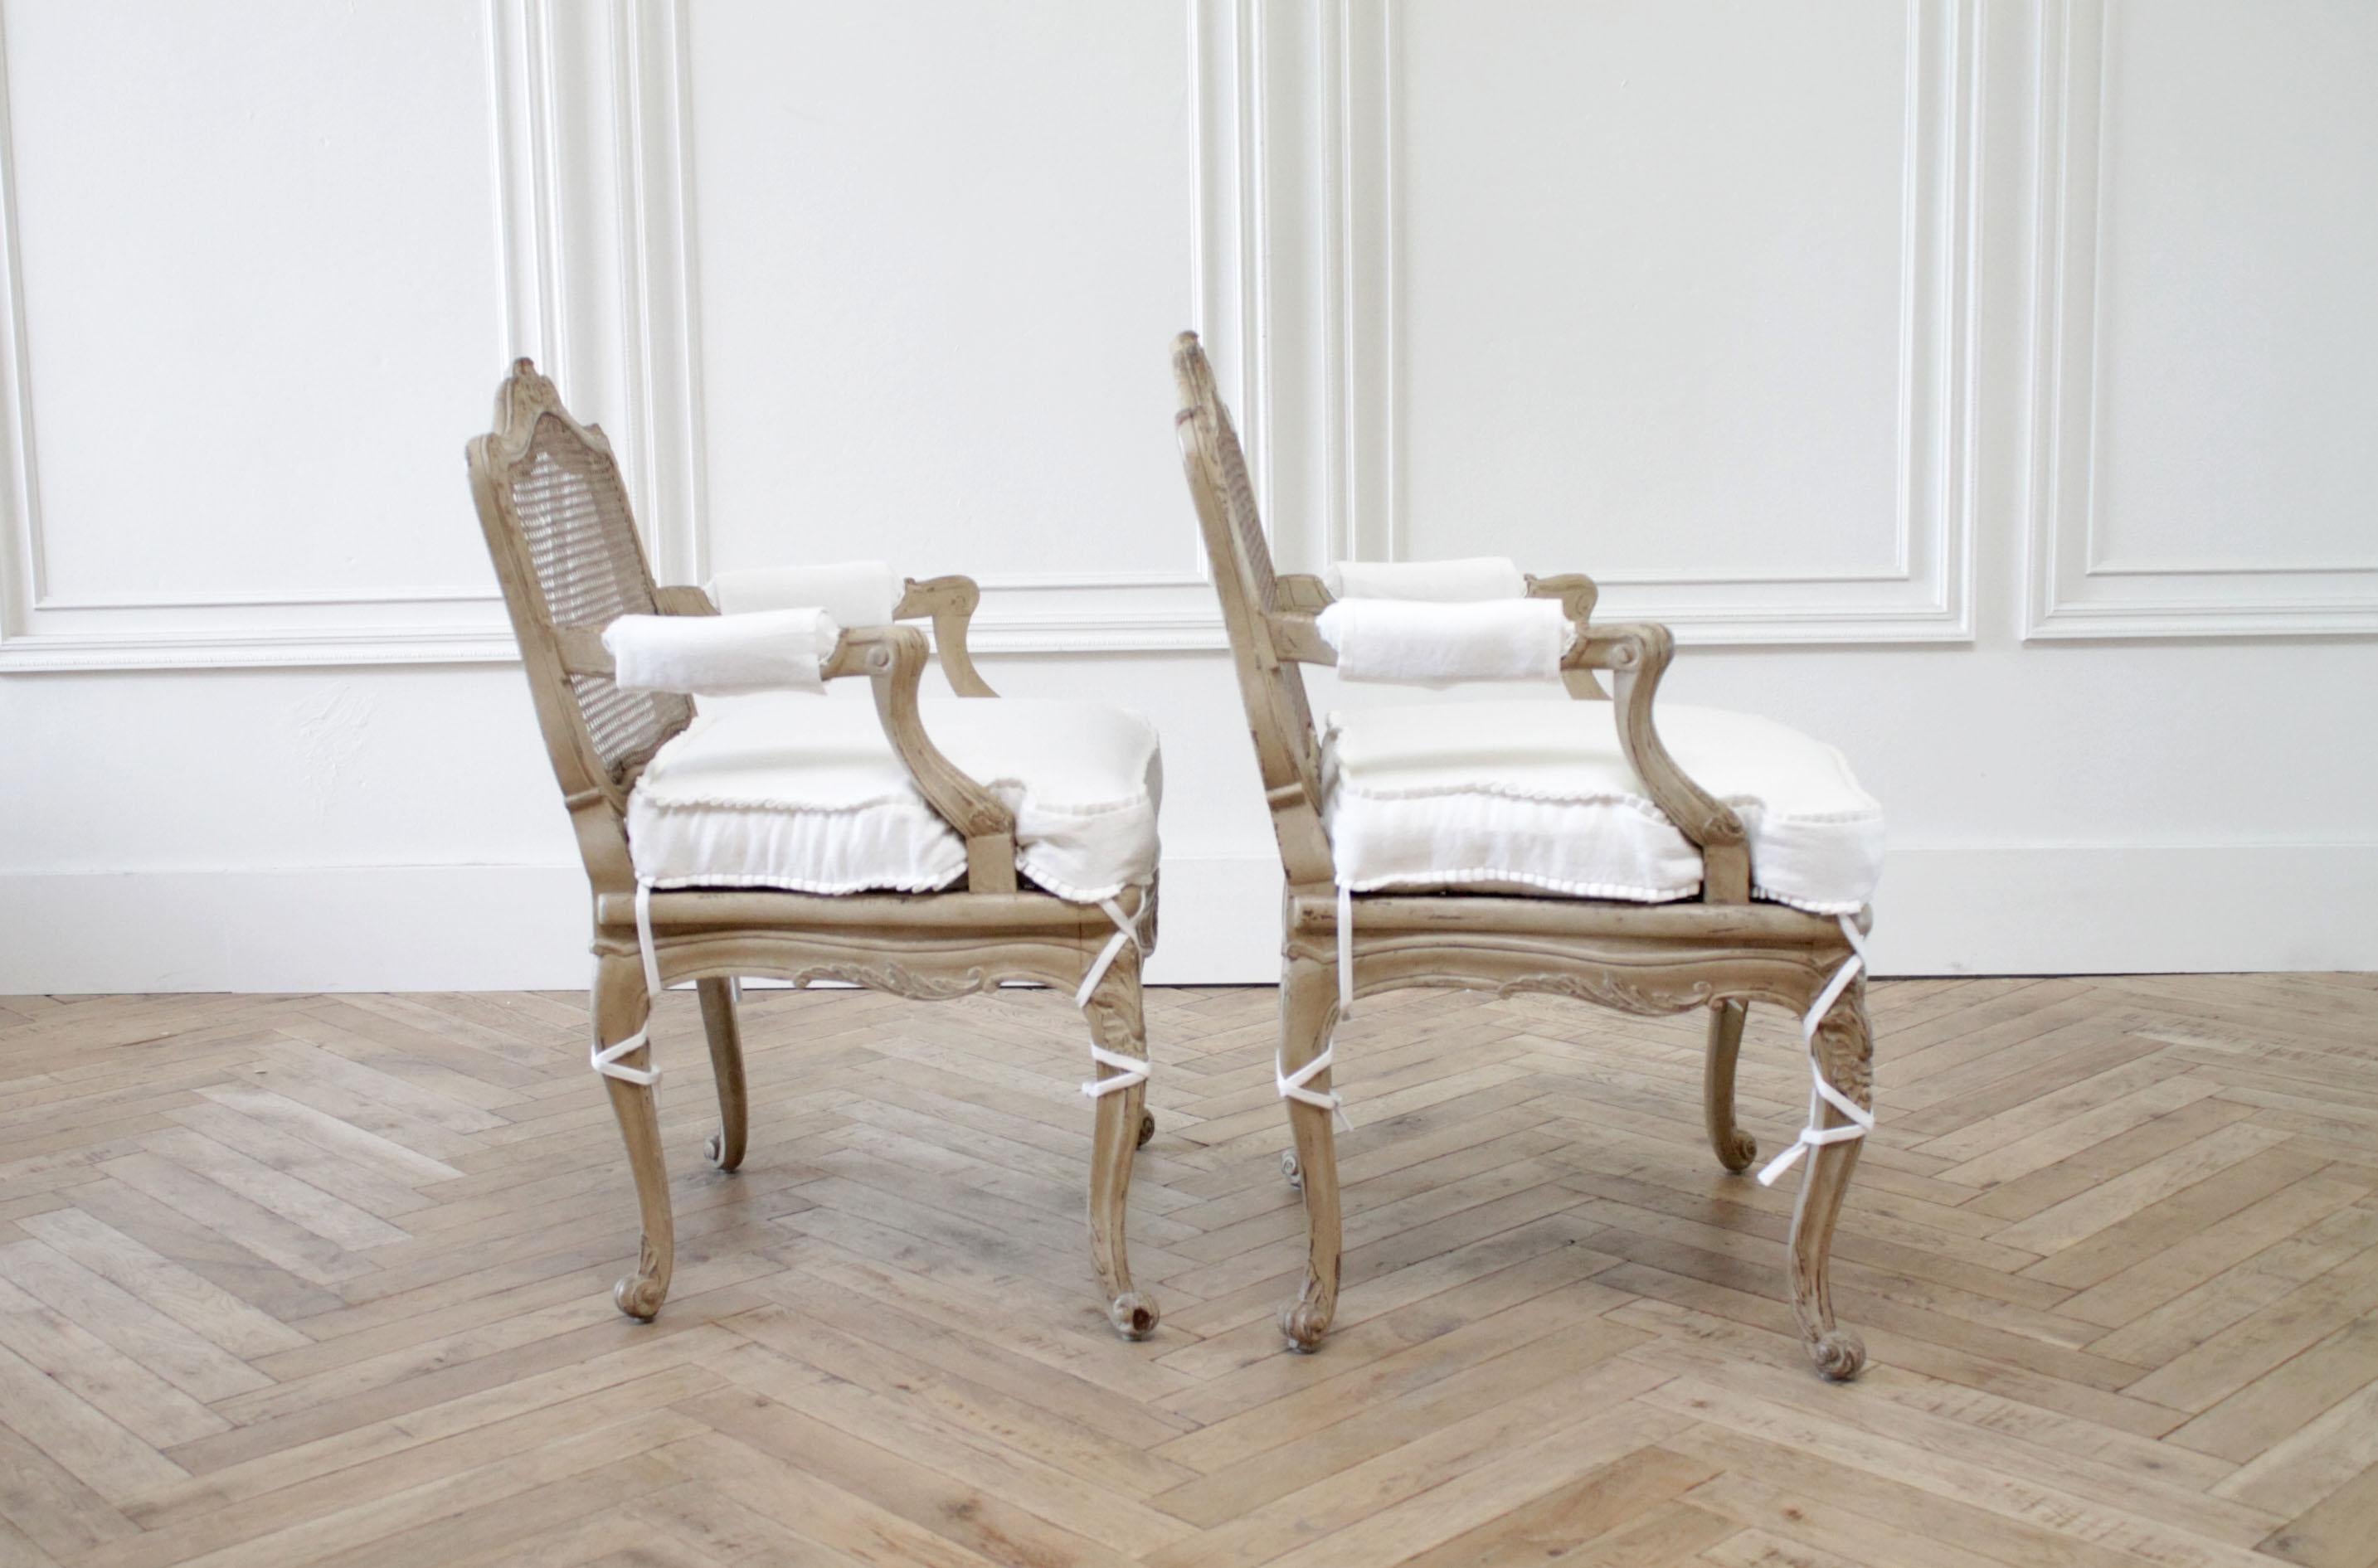 Pair of Antique French Arm Chairs in Original Painted Finish and White Linen 1